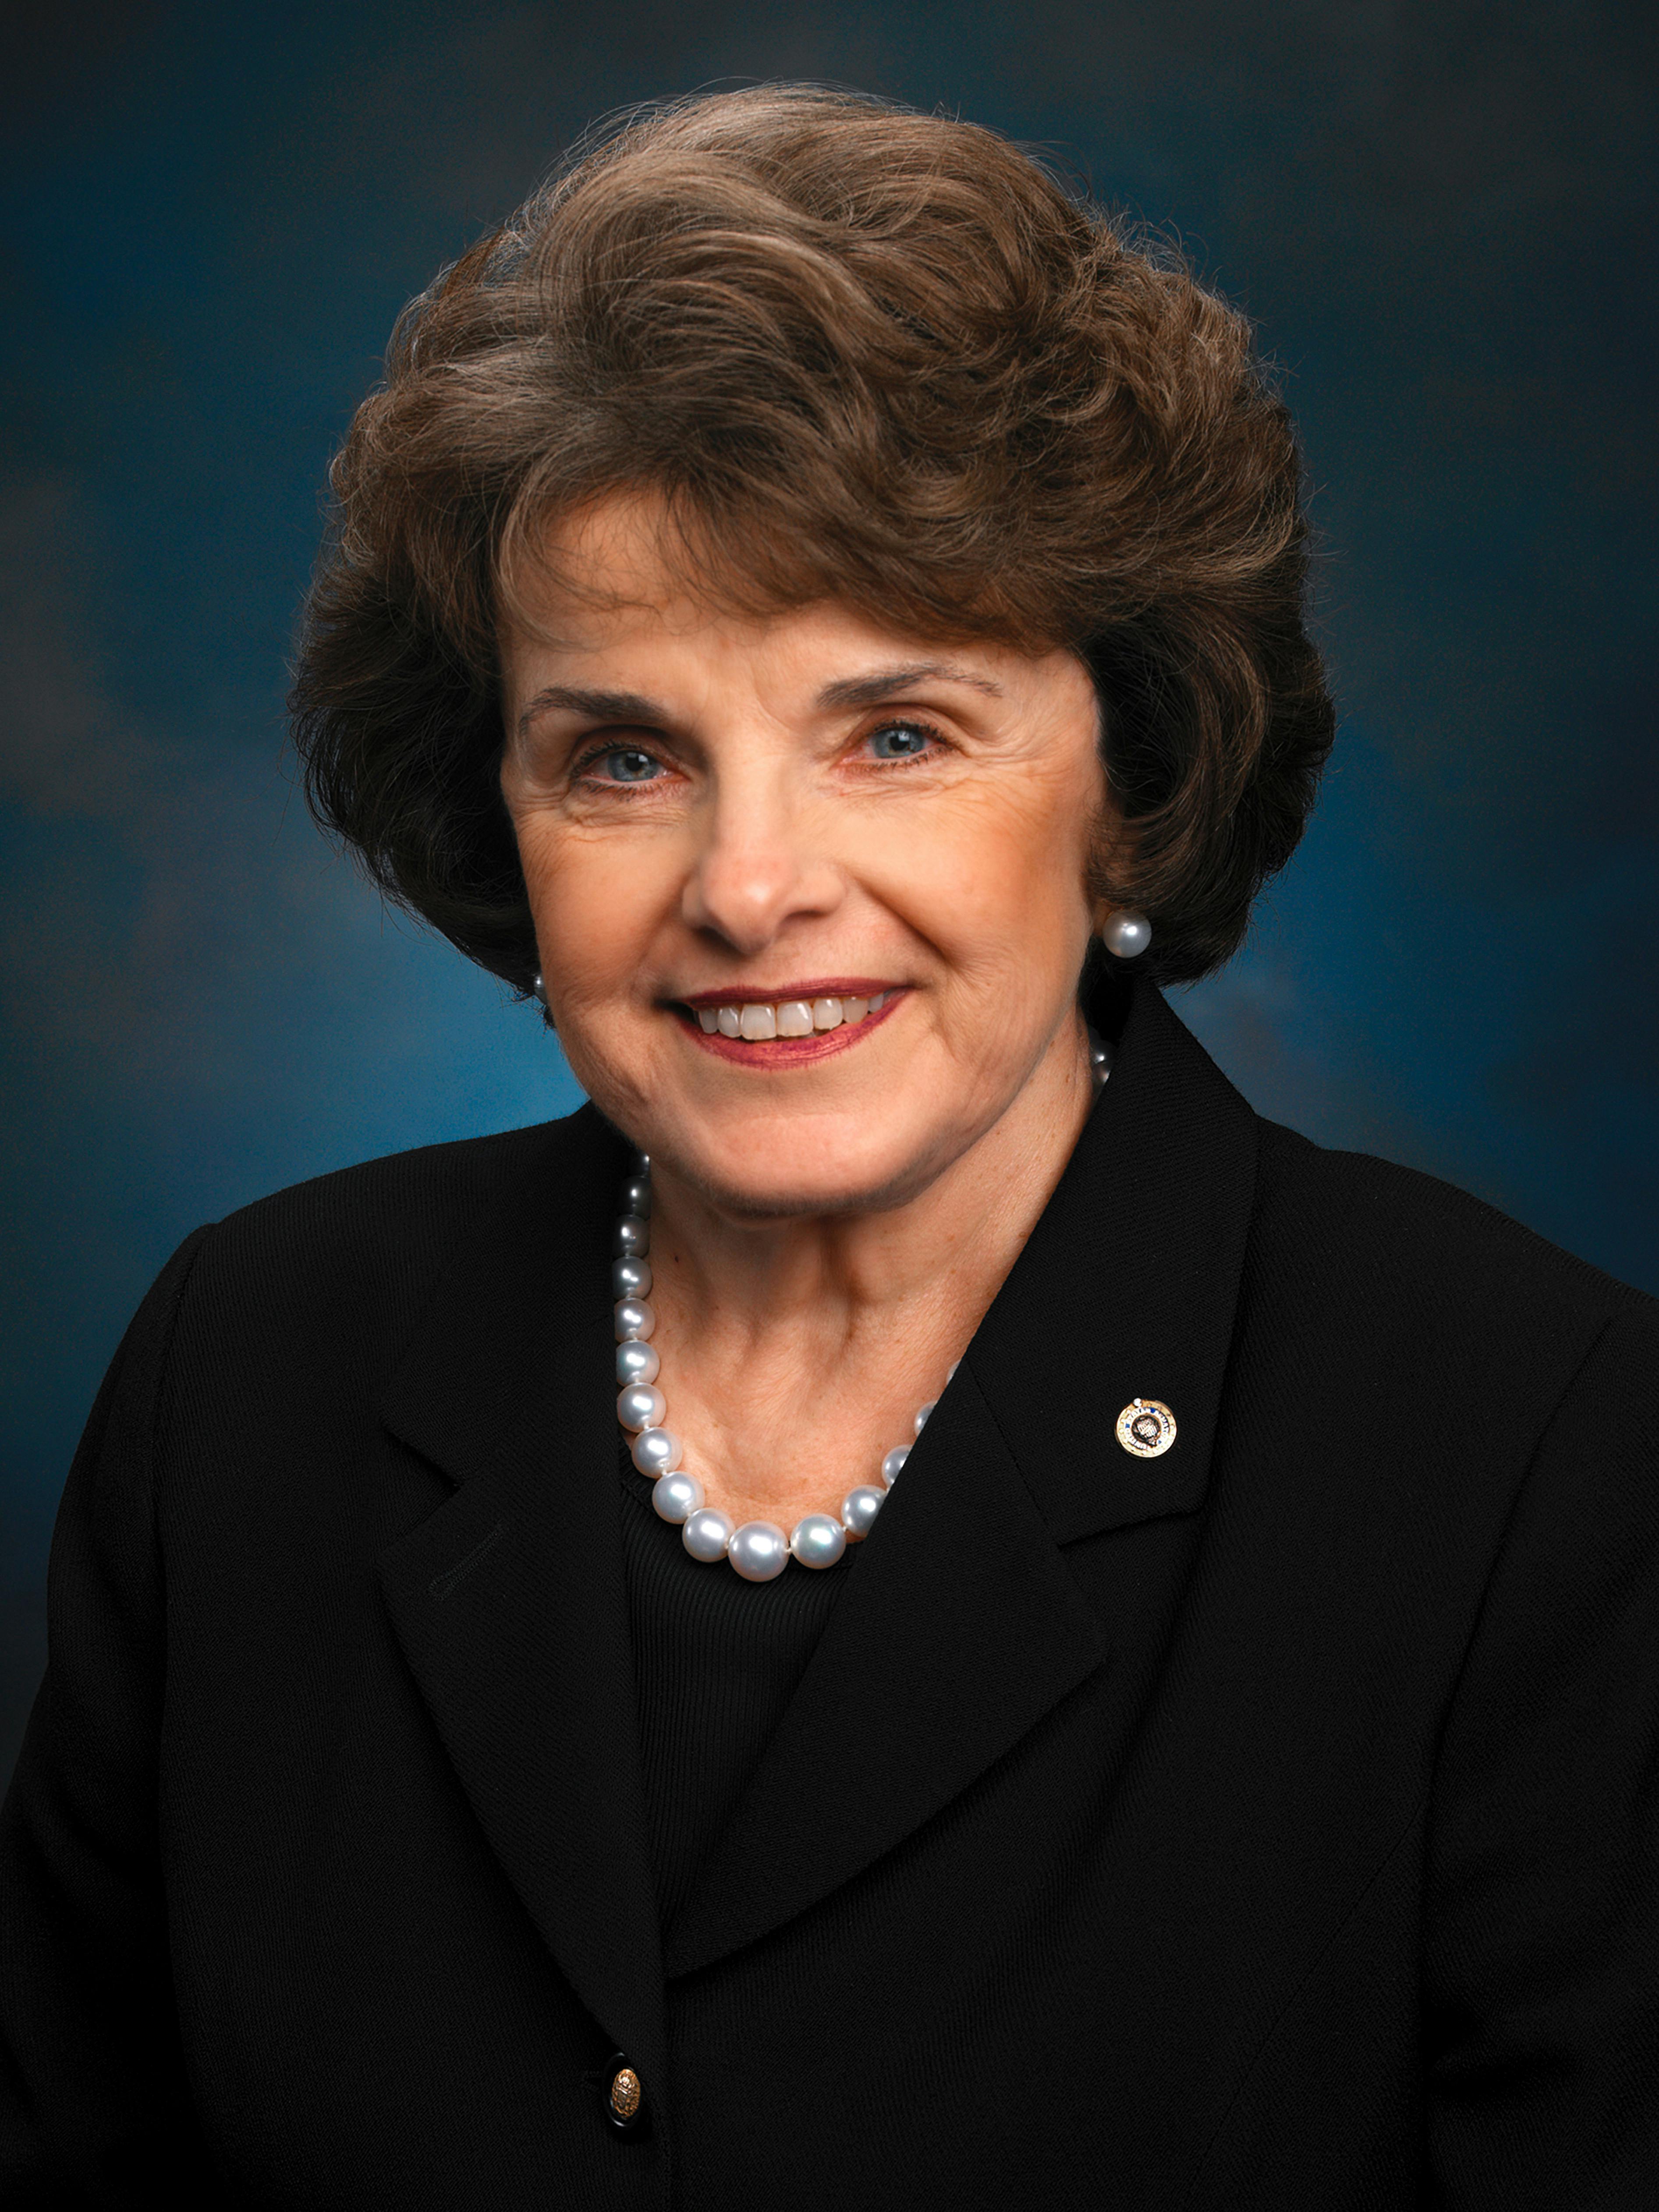 Profile picture of Dianne Feinstein